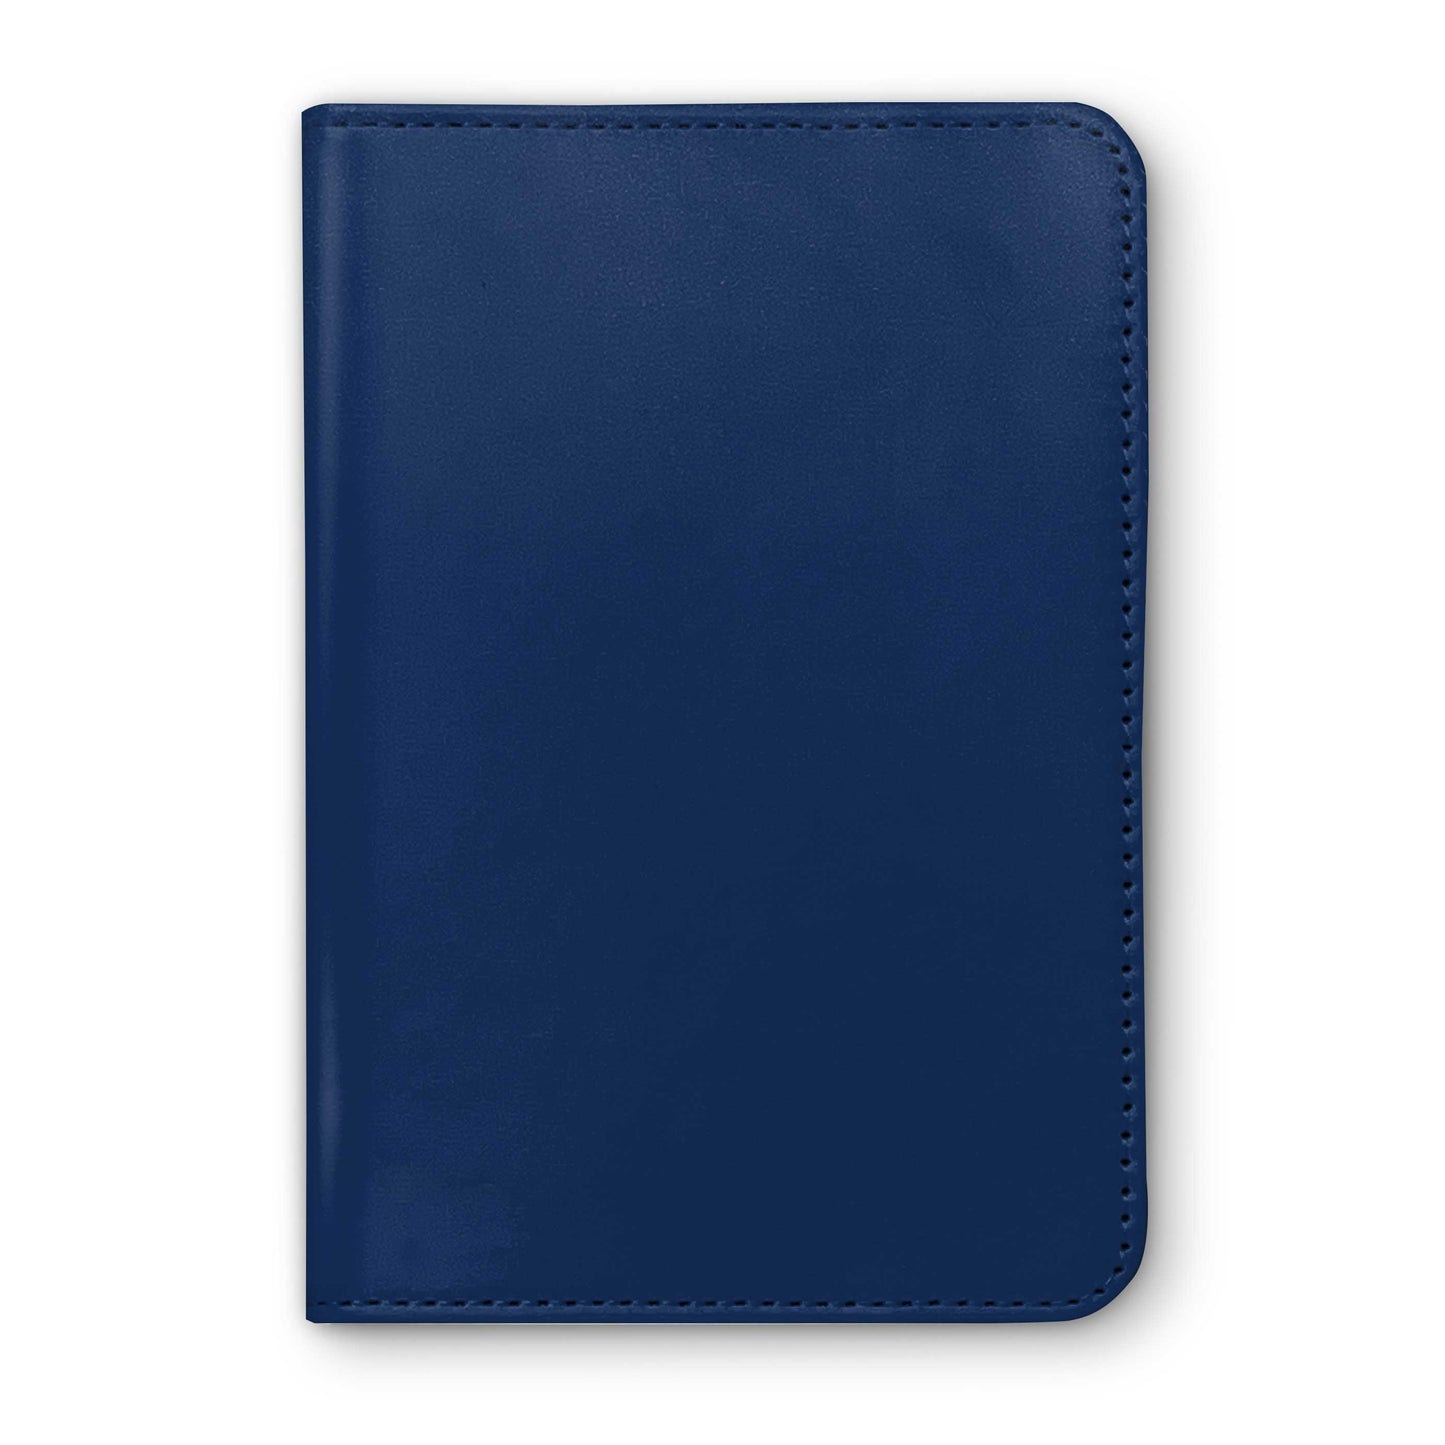 Mrs N Flynn Horse Racing Passport Holder - Hacked Up Horse Racing Gifts